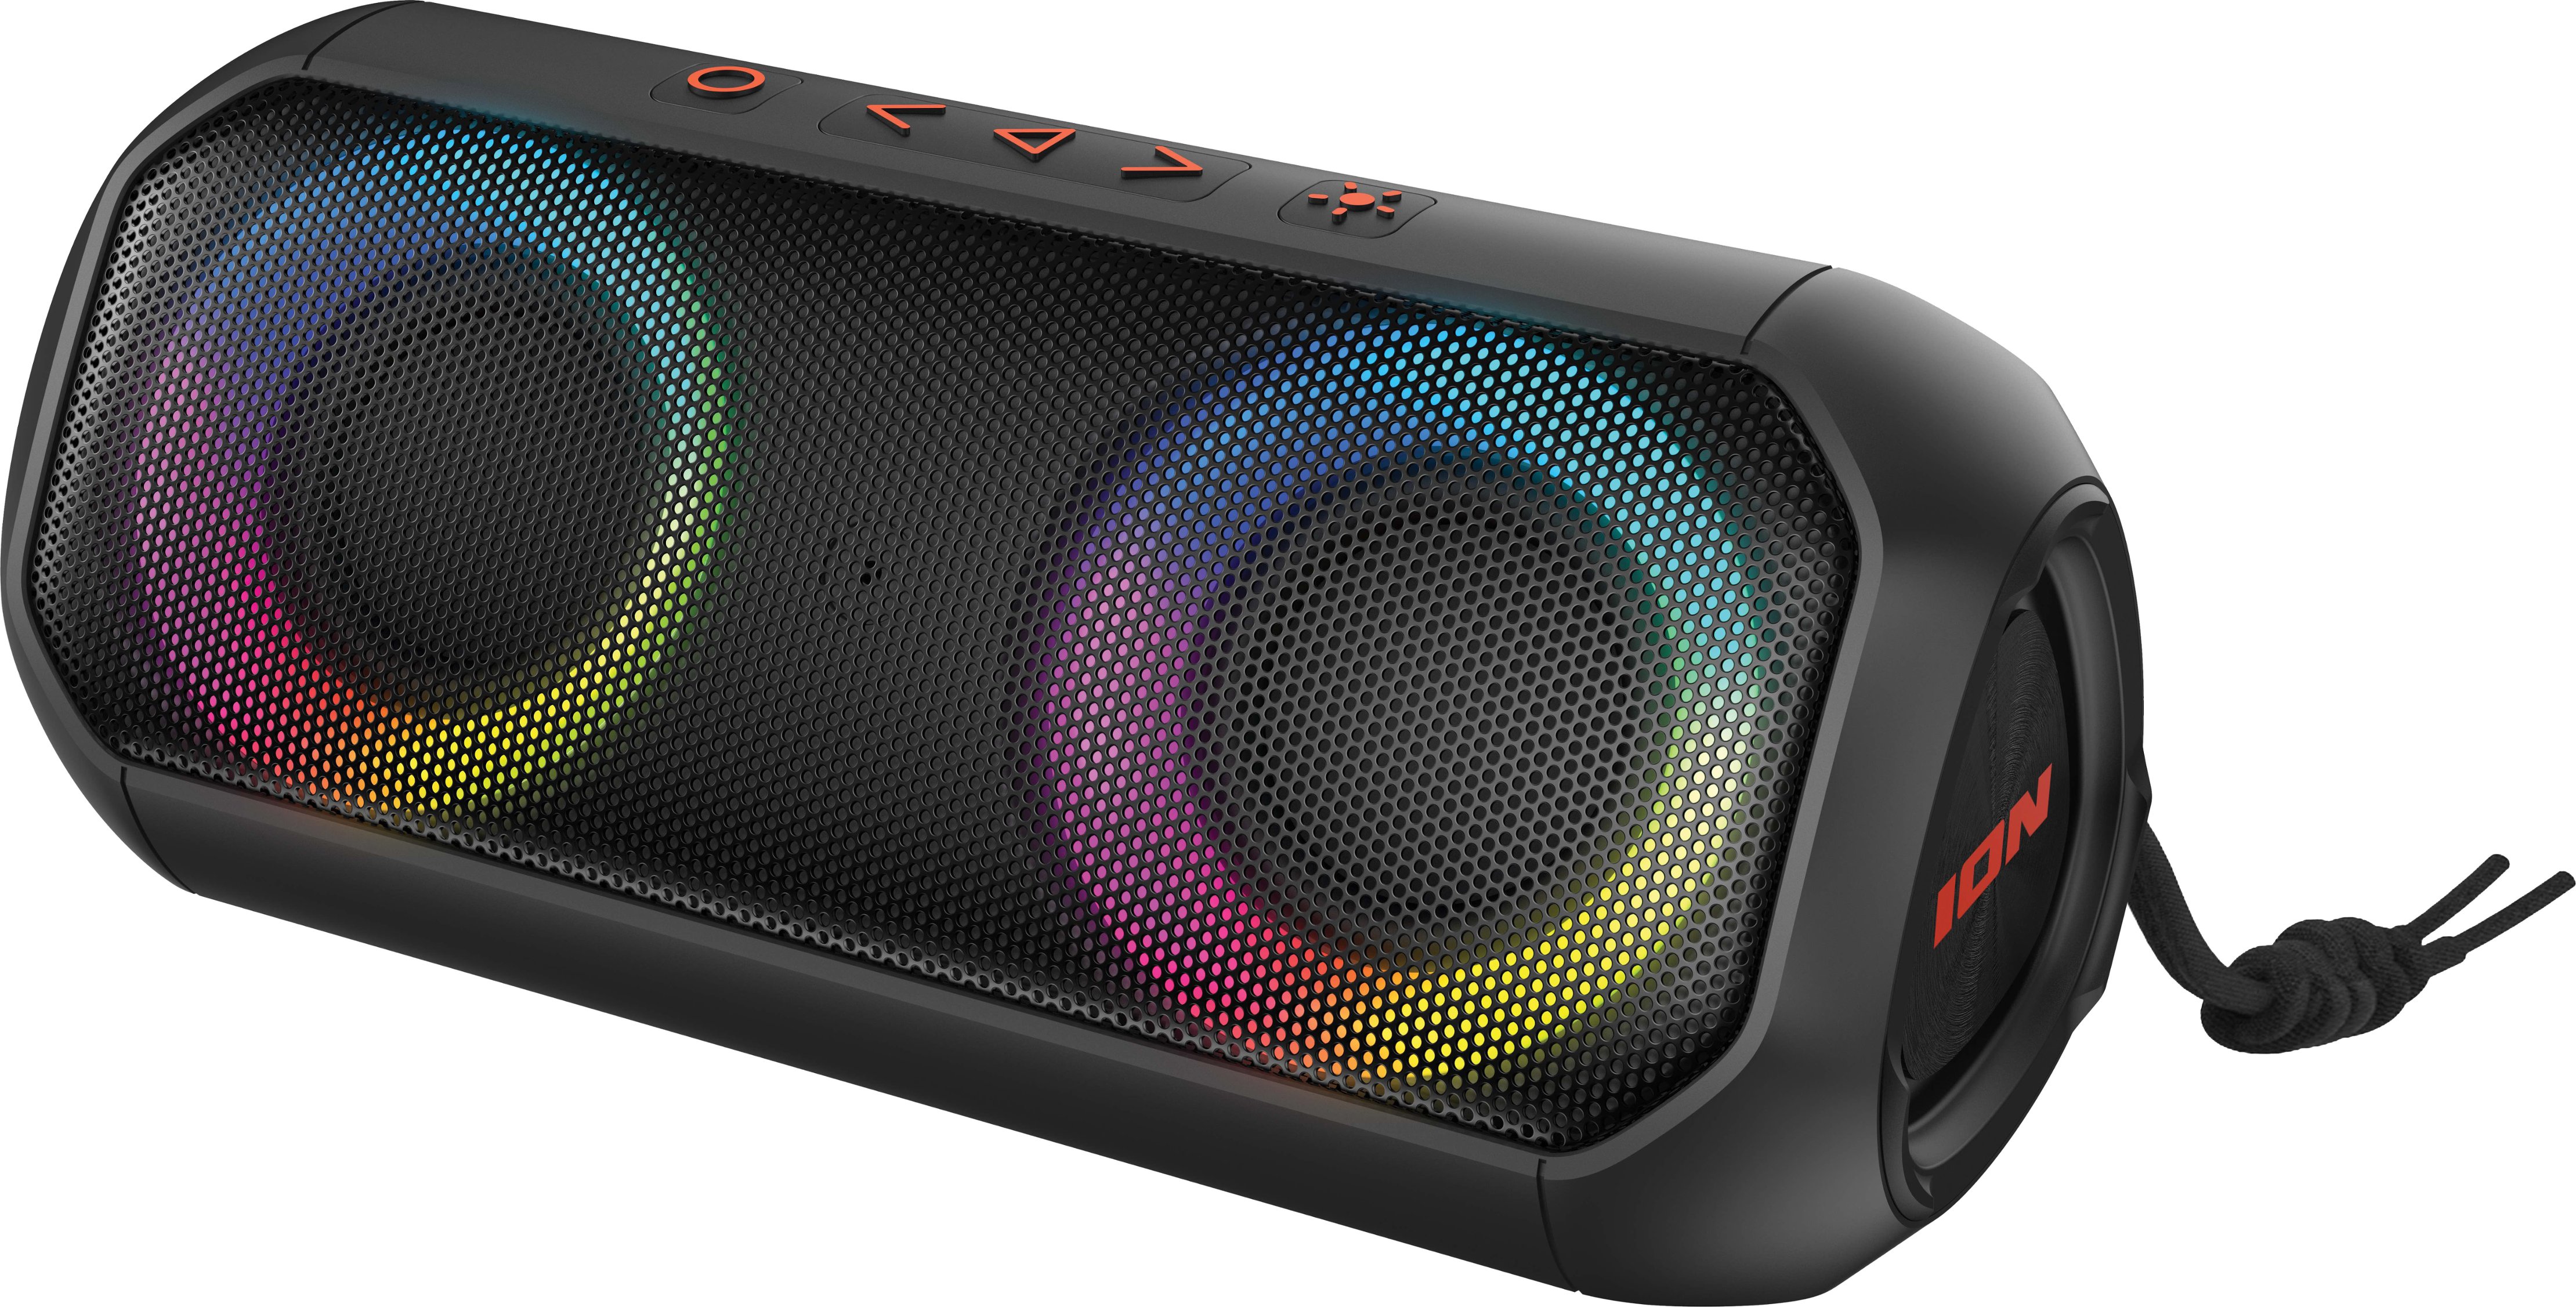 ION Audio Uber Boom 40W Lights Portable with LED Wireless Speaker Black and Bluetooth Built-In UBERBOOMXUS Multi-Colored Microphone - Best All-Weather Buy